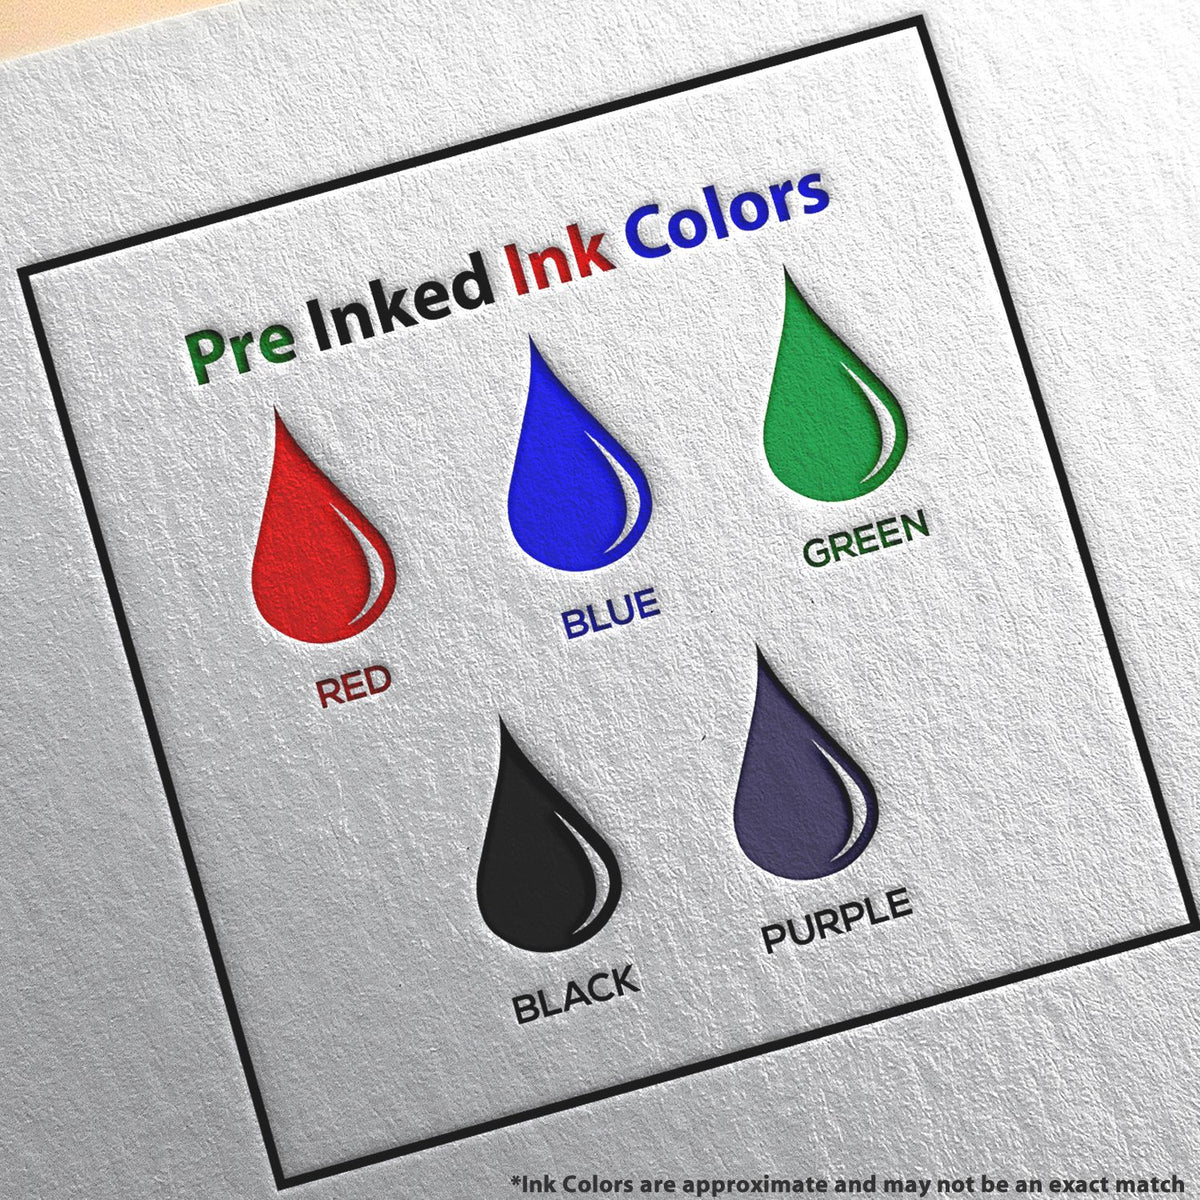 A picture showing the different ink colors or hues available for the Premium MaxLight Pre-Inked Minnesota Landscape Architectural Stamp product.